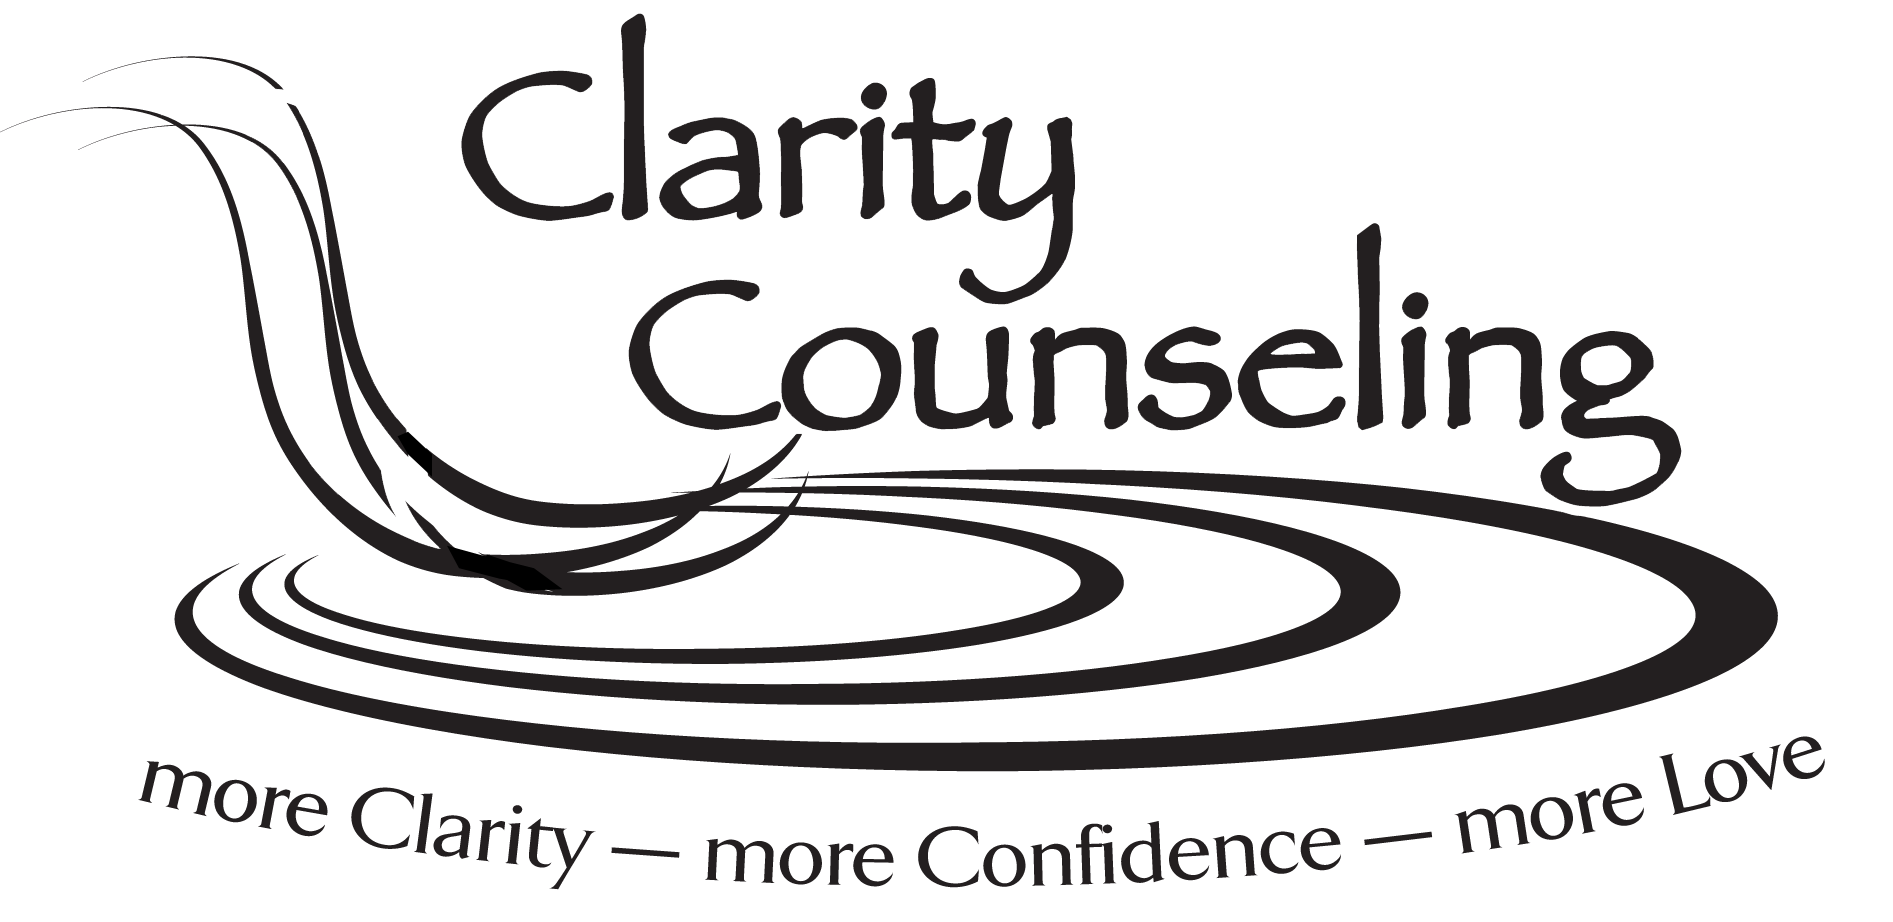 Clarity Counseling, Counselors in Fargo